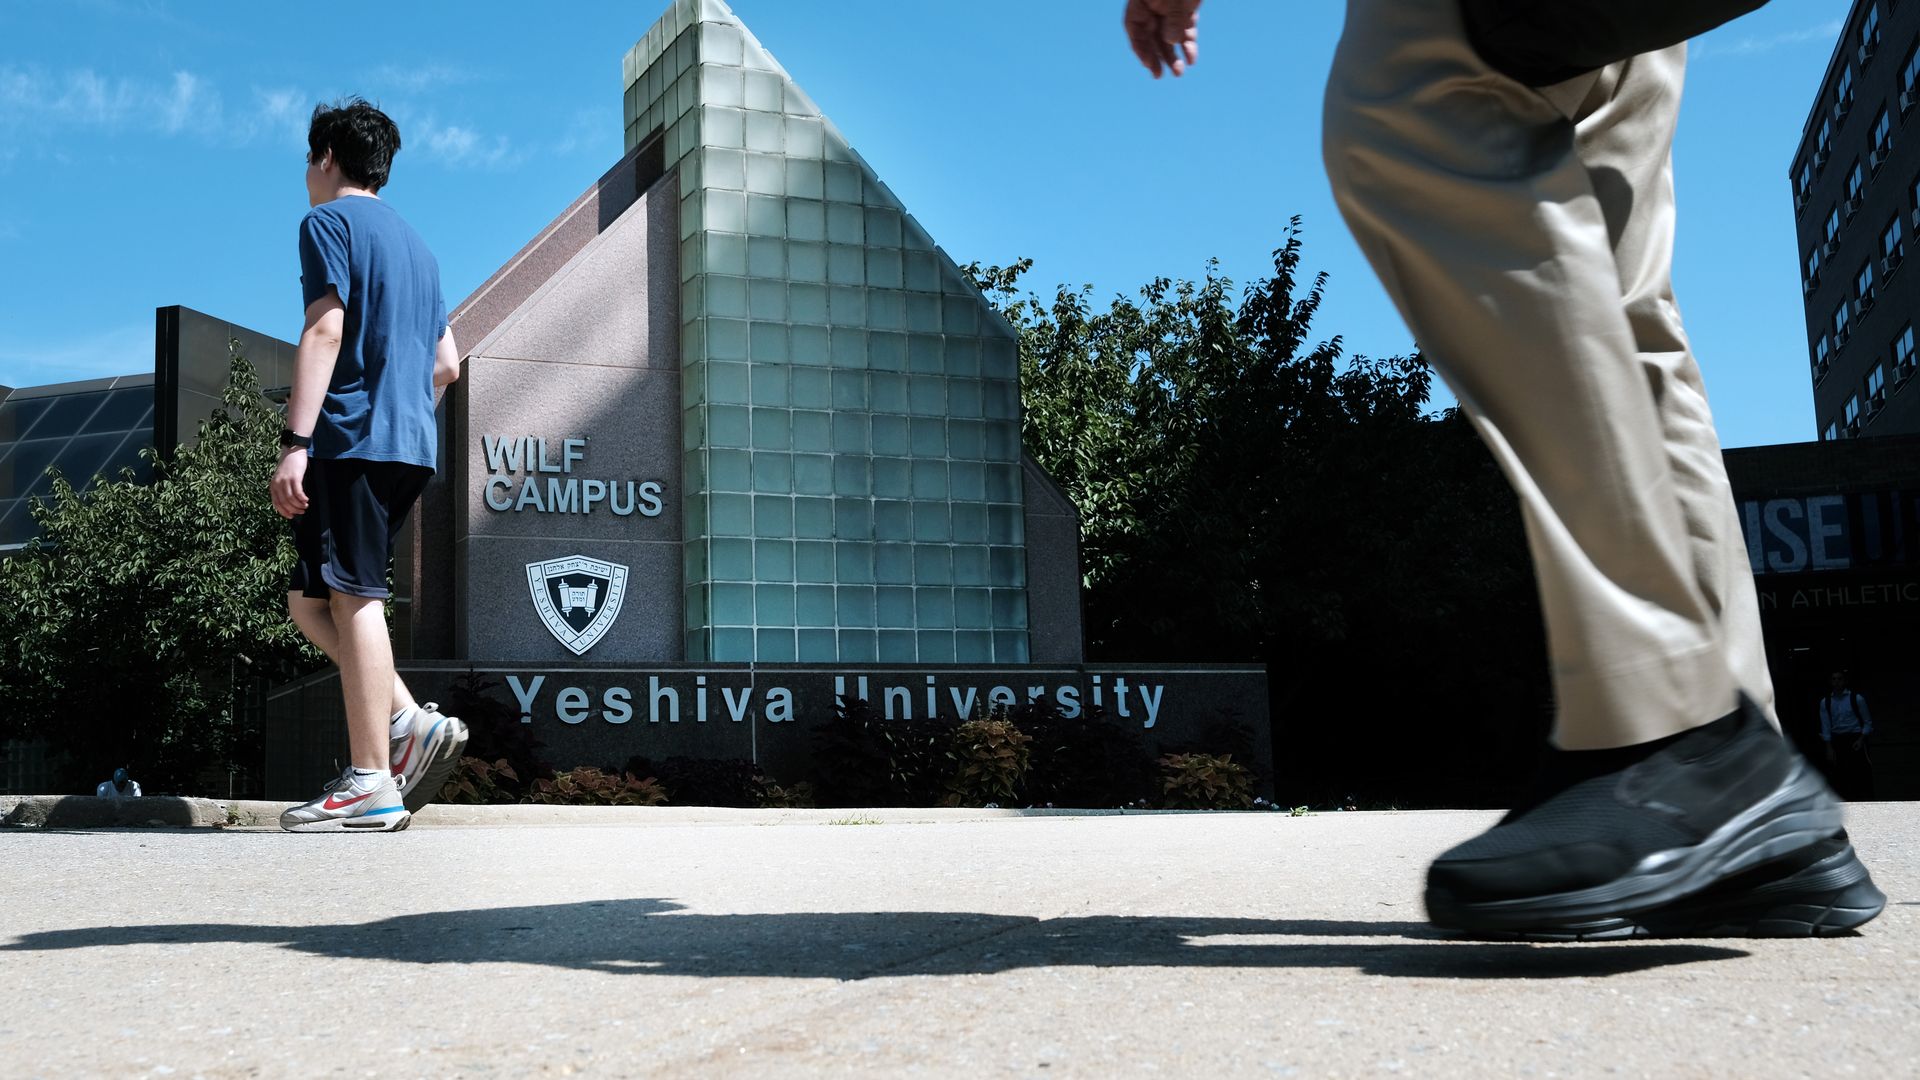 Photo of people walking by a building that says "Yeshiva University, WILF campus"